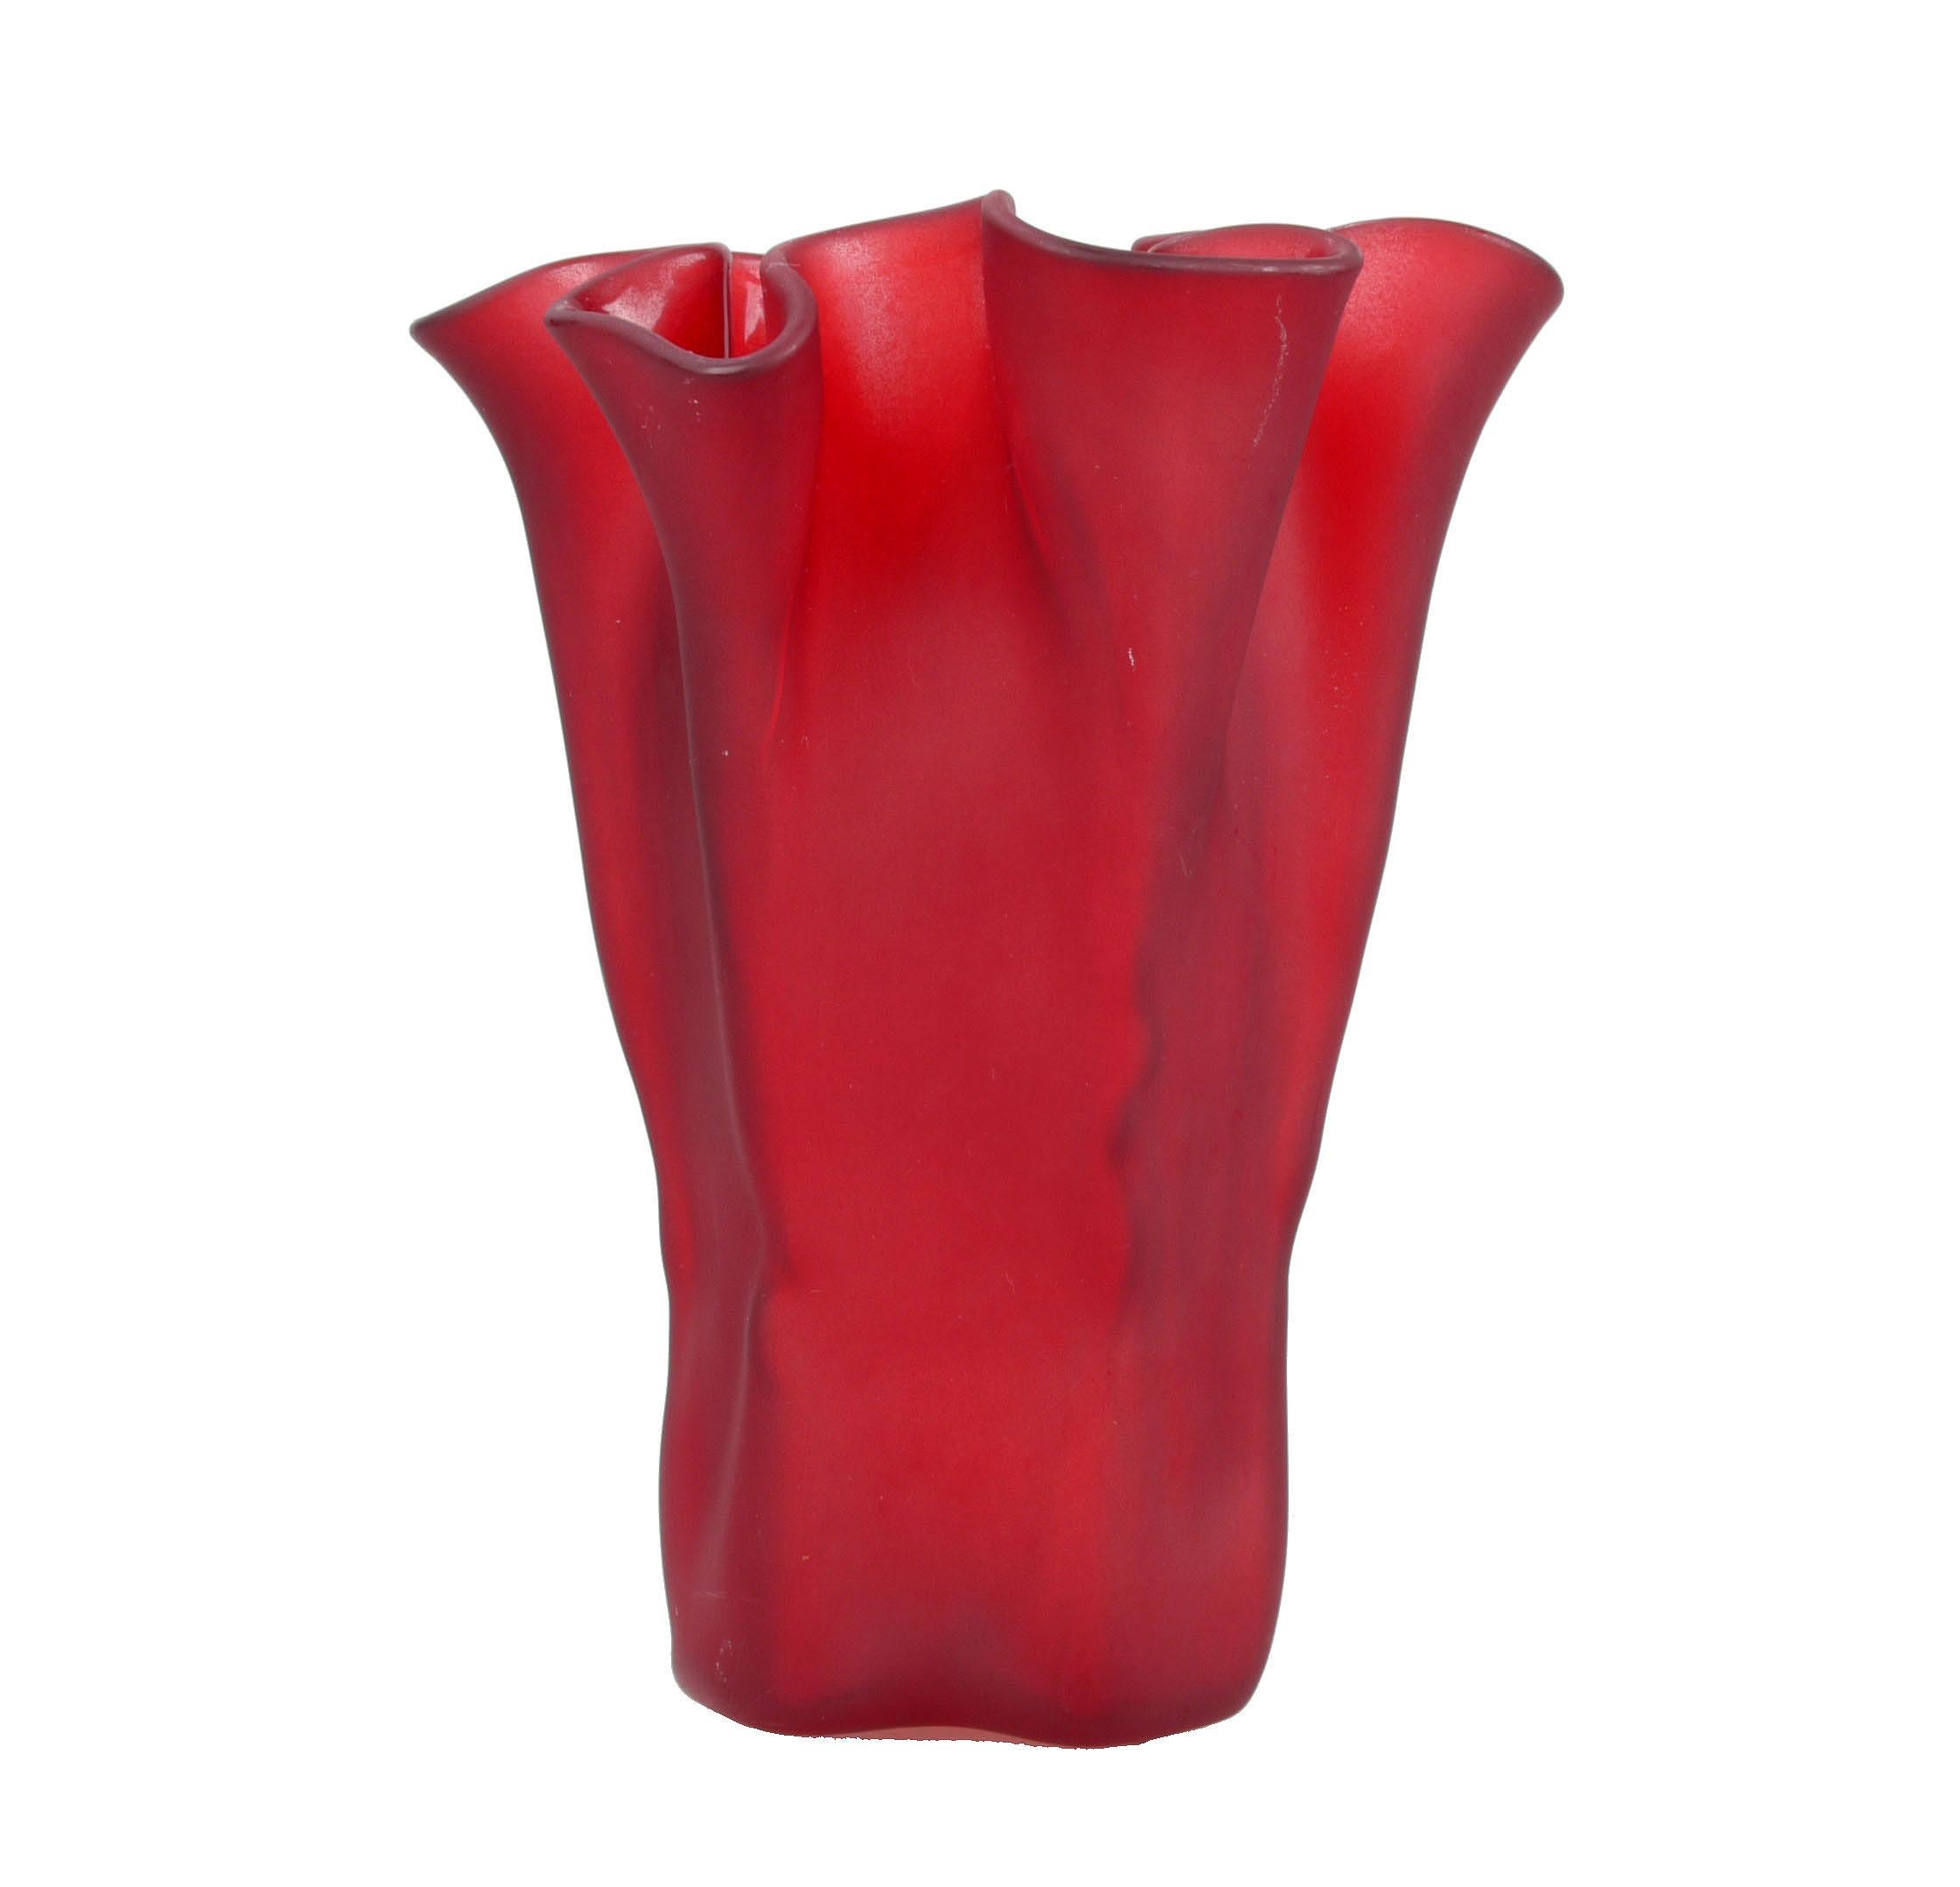 Gorgeous Scandinavian Modern blown, and Hand painted Muurla Red Art Glass Ruffled Handkershief Vase made in Finland. 
Makers Mark on Top of Vase. This Fazzoletto Style Vase brings joy to any Family Gathering.